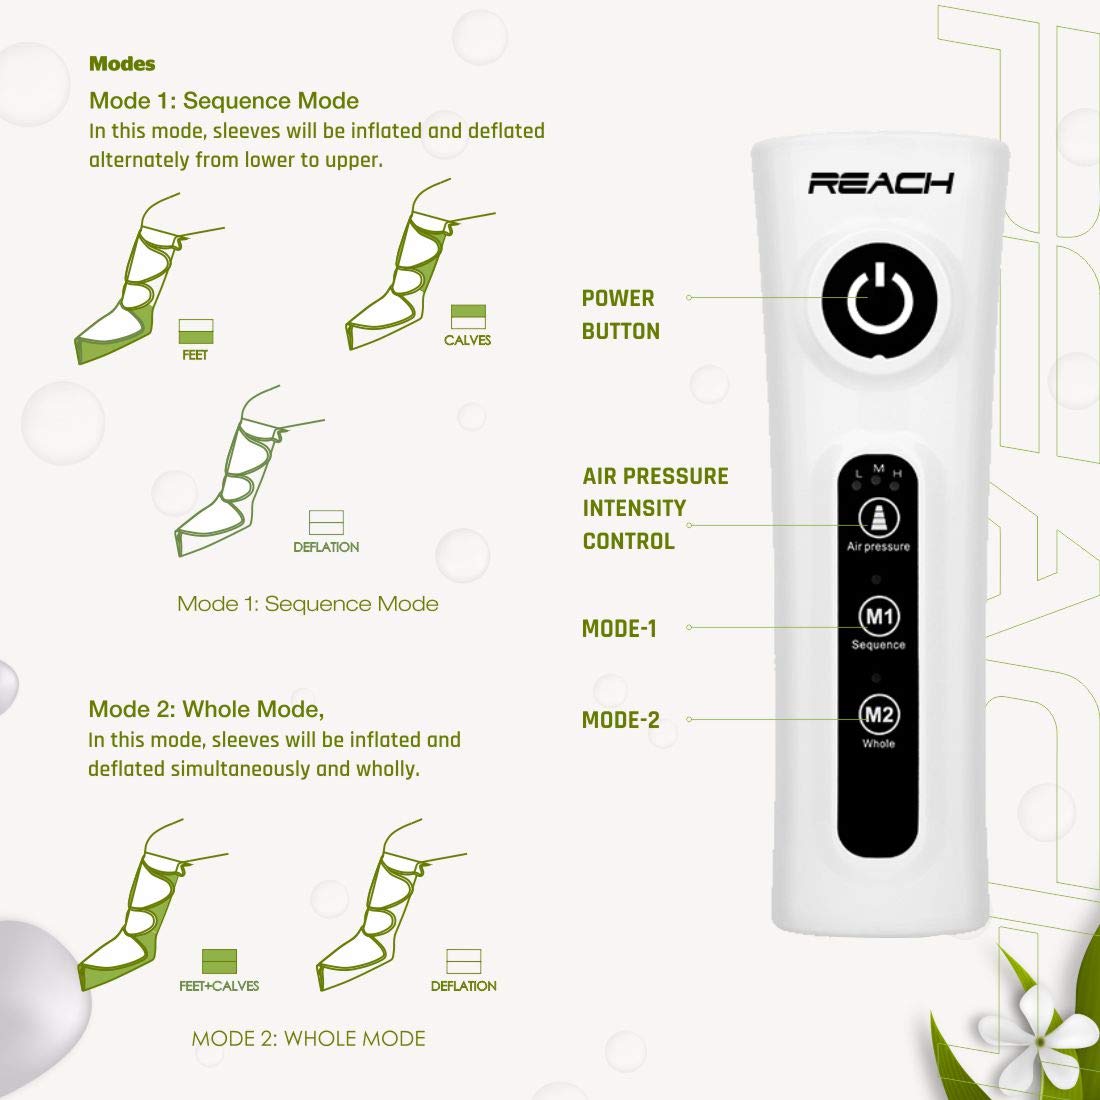 Different Modes for leg massage and control buttons